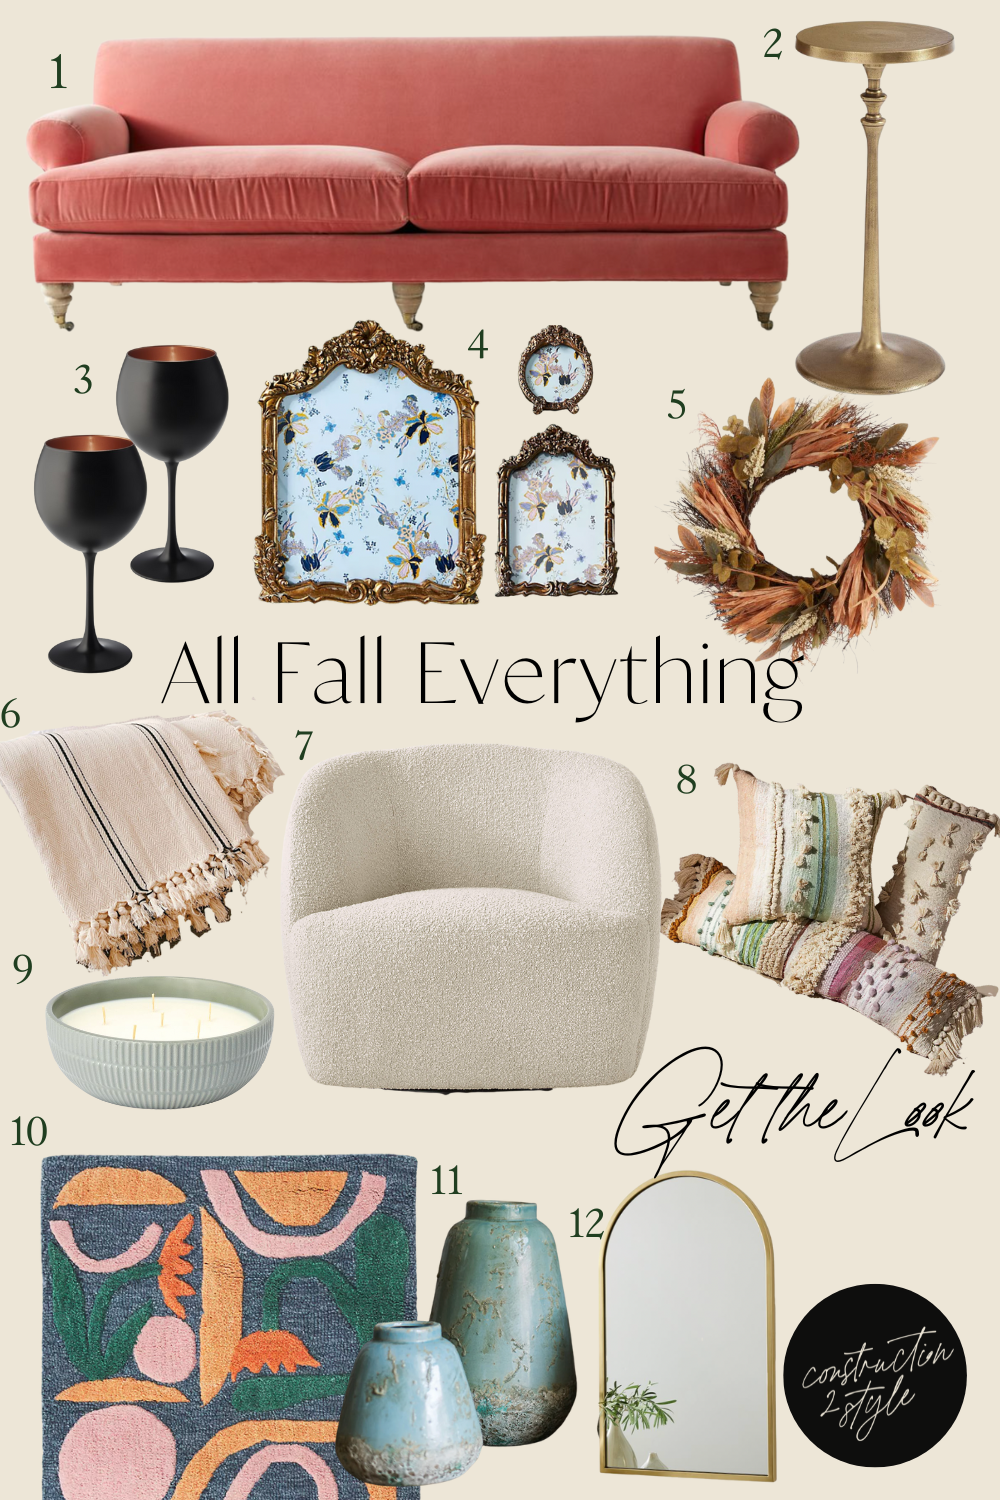 All Fall Everything